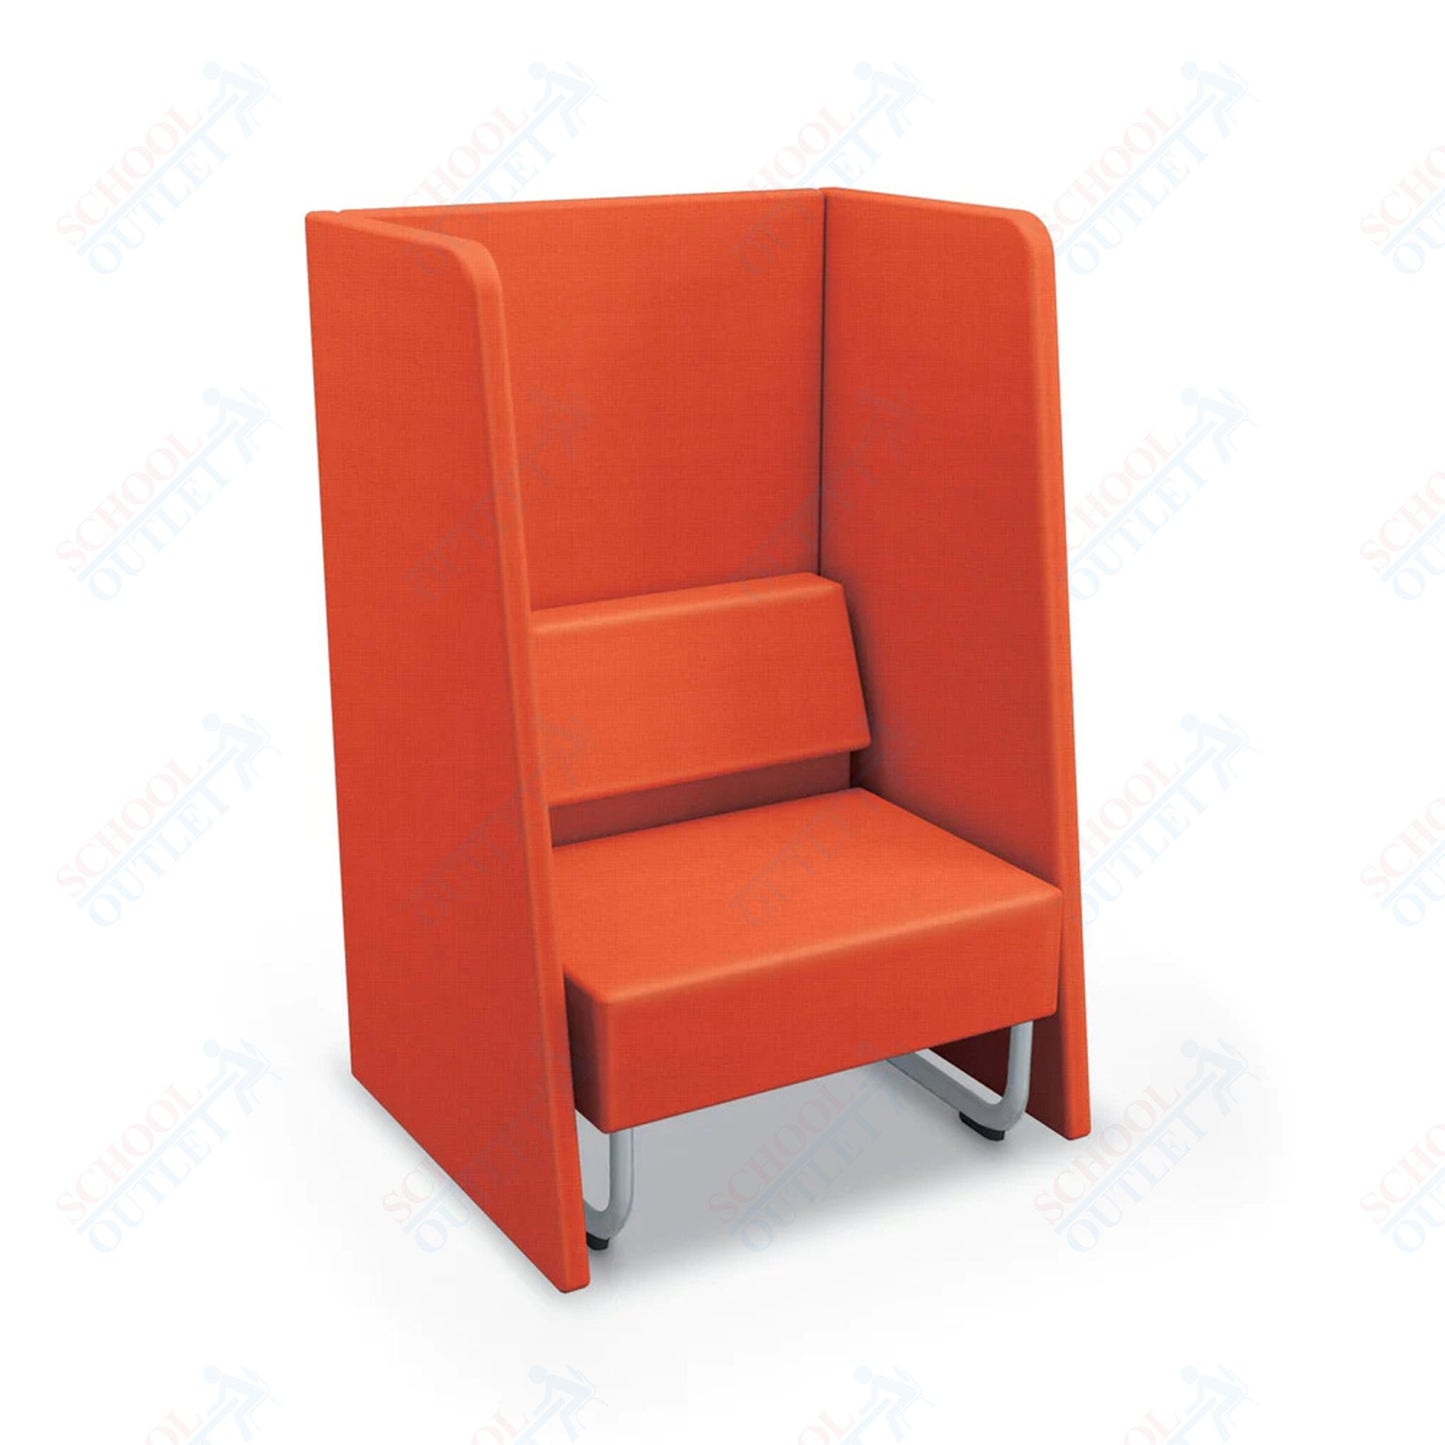 Mooreco Akt Soft Seating Lounge High Back Chair - Grade 02 Fabric and Powder Coated Sled Legs